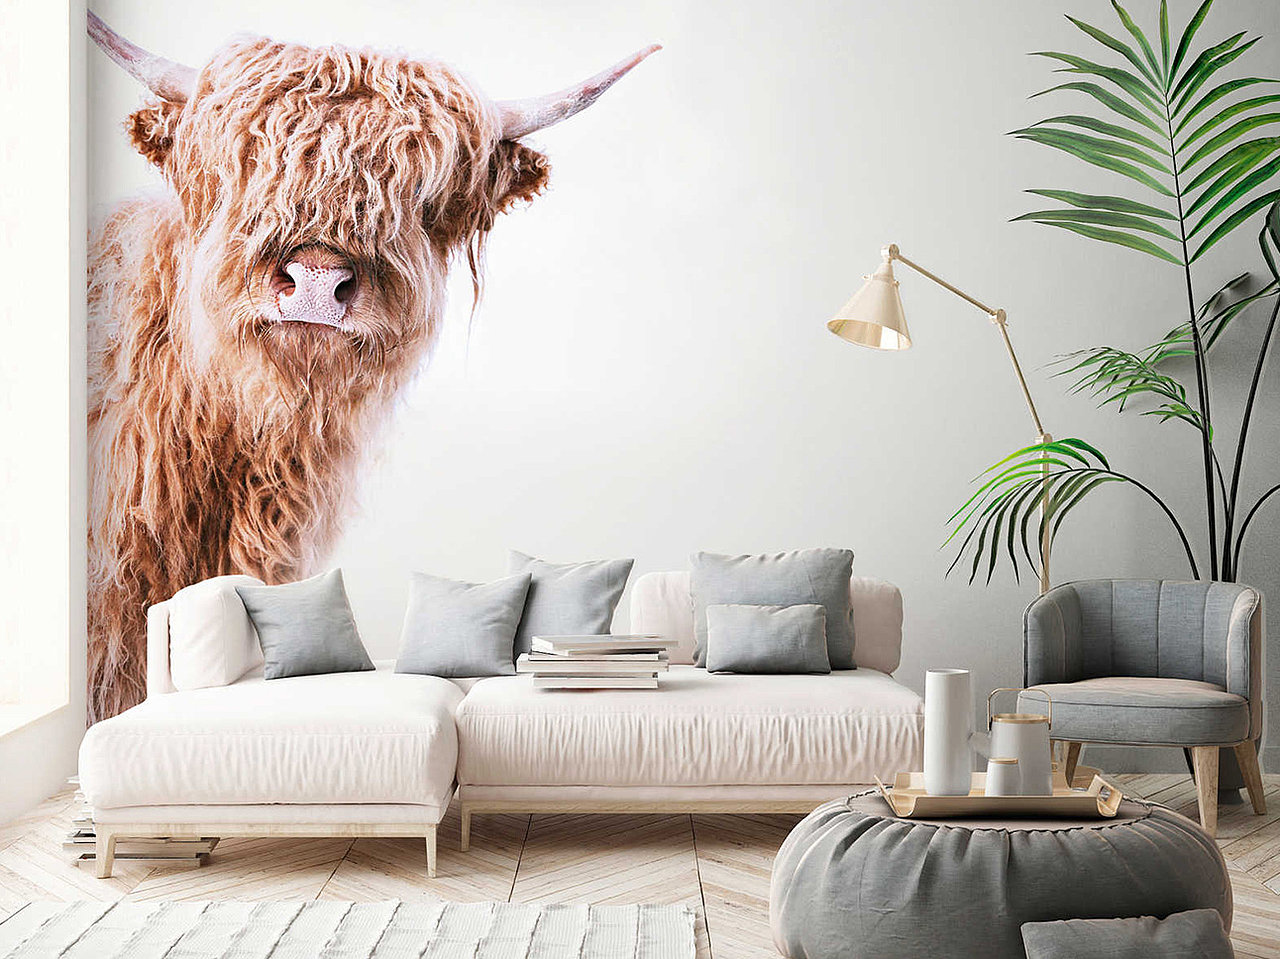 Animal mural with highland cattle in shaggy look